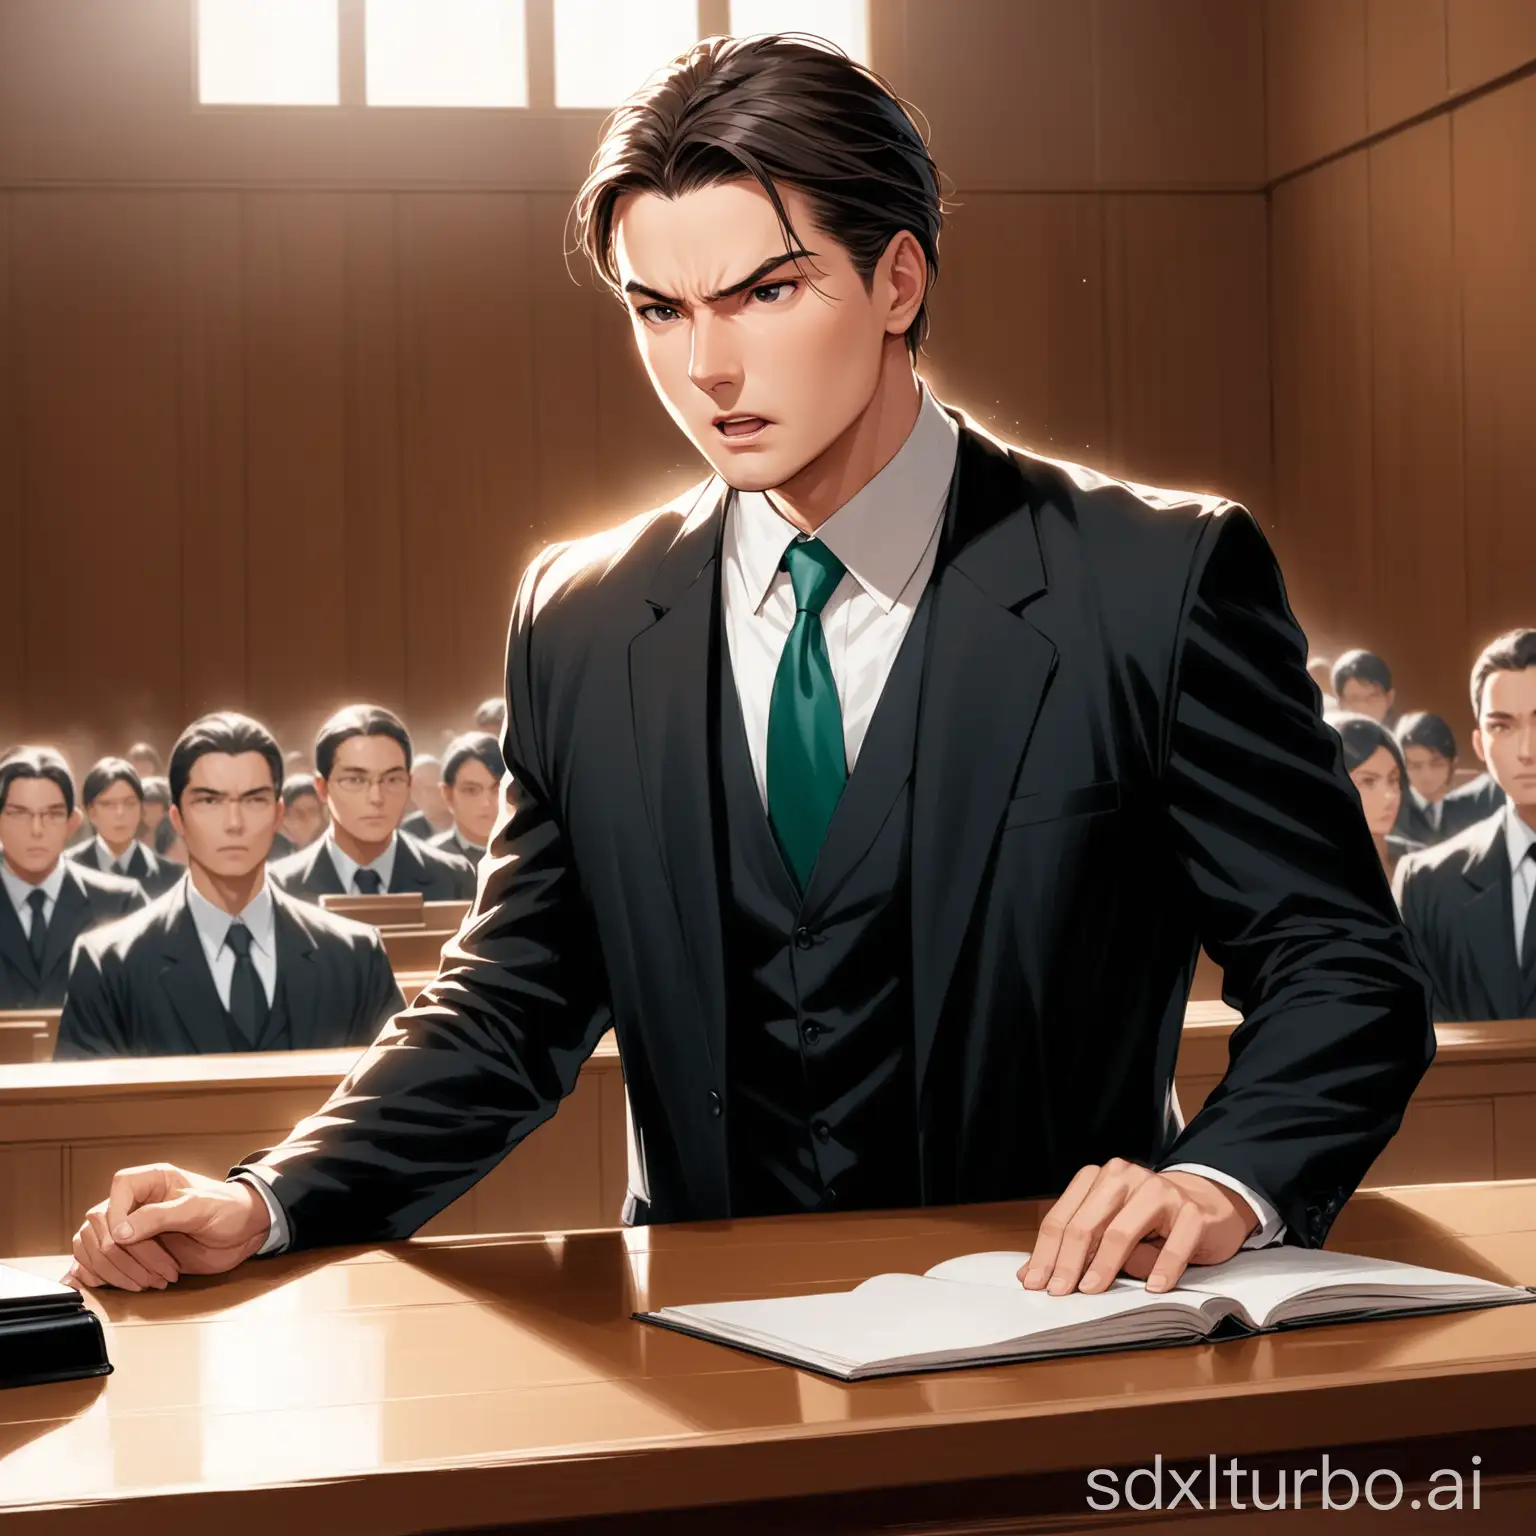 A lawyer, speaking passionately in court, with only him in the frame, high definition, masterpiece